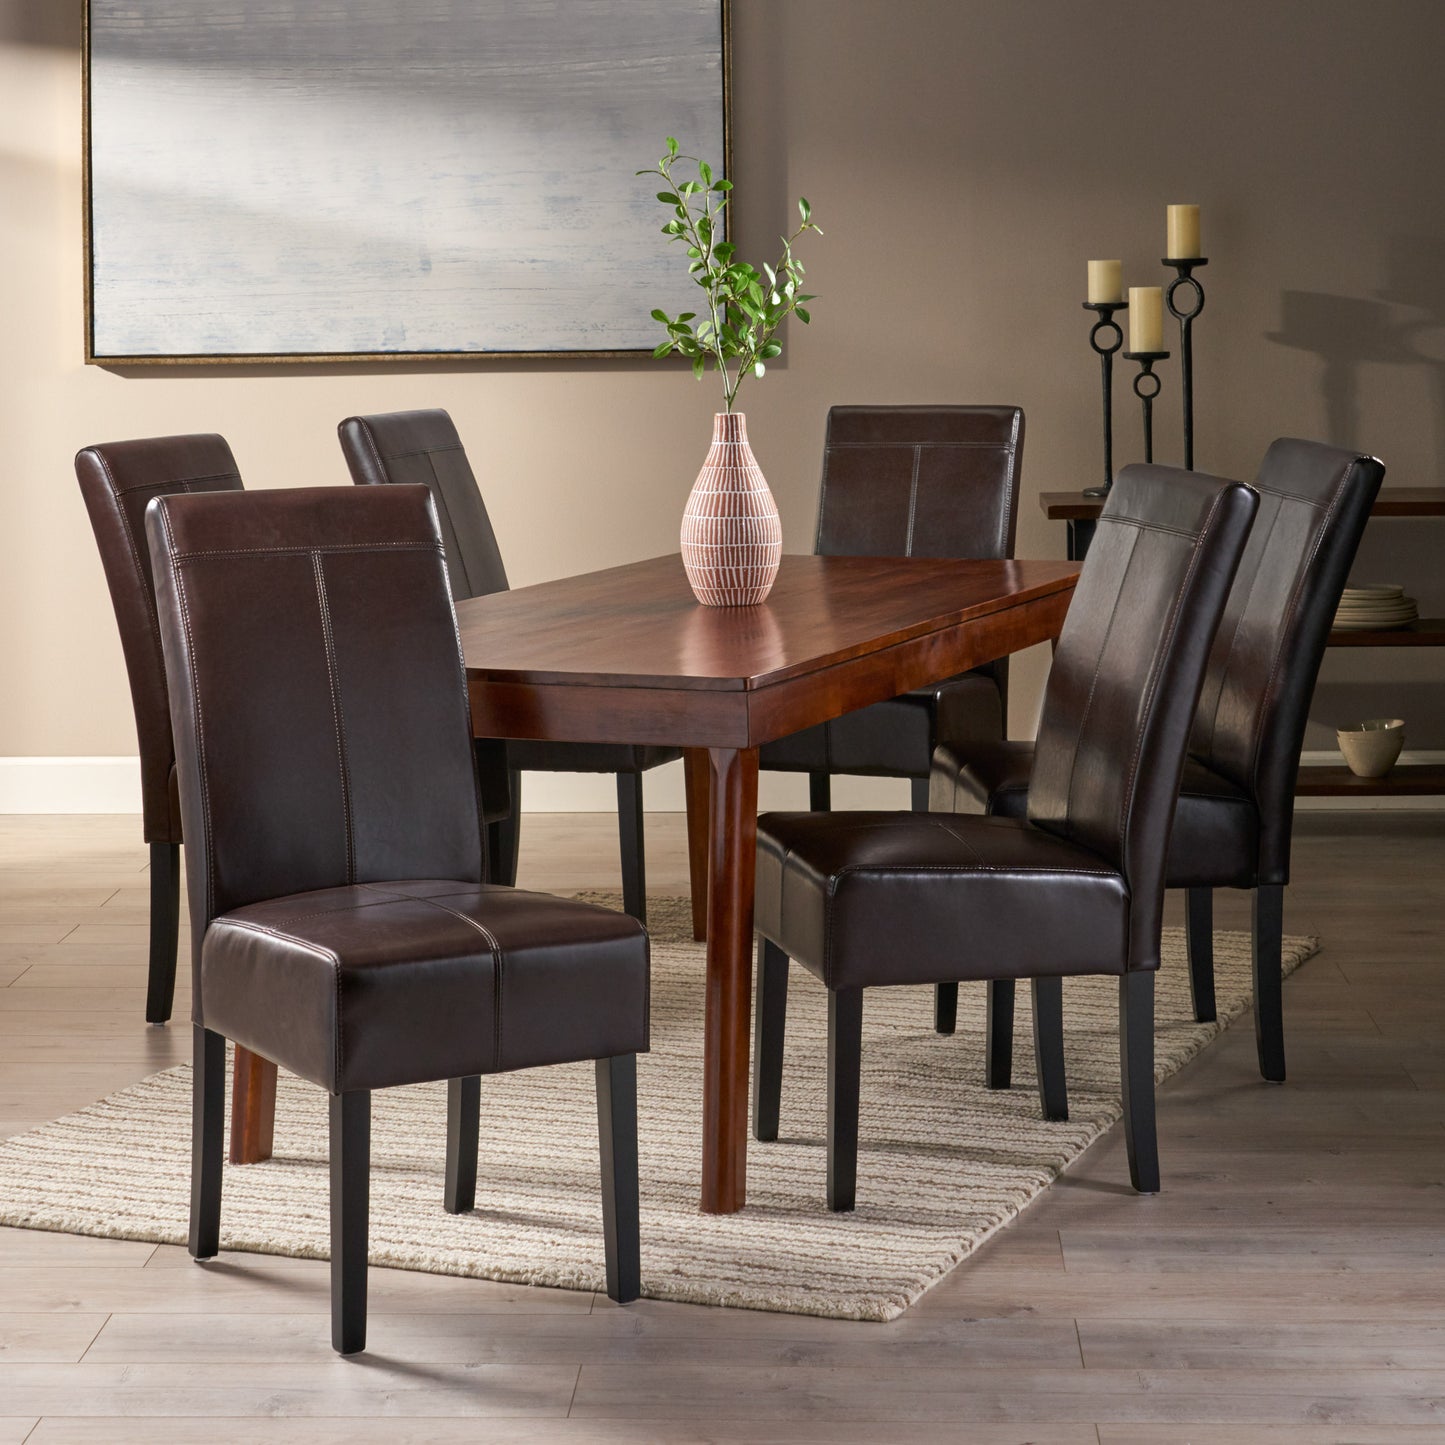 Percival T-stitched Leather Dining Chairs (Set of 6)